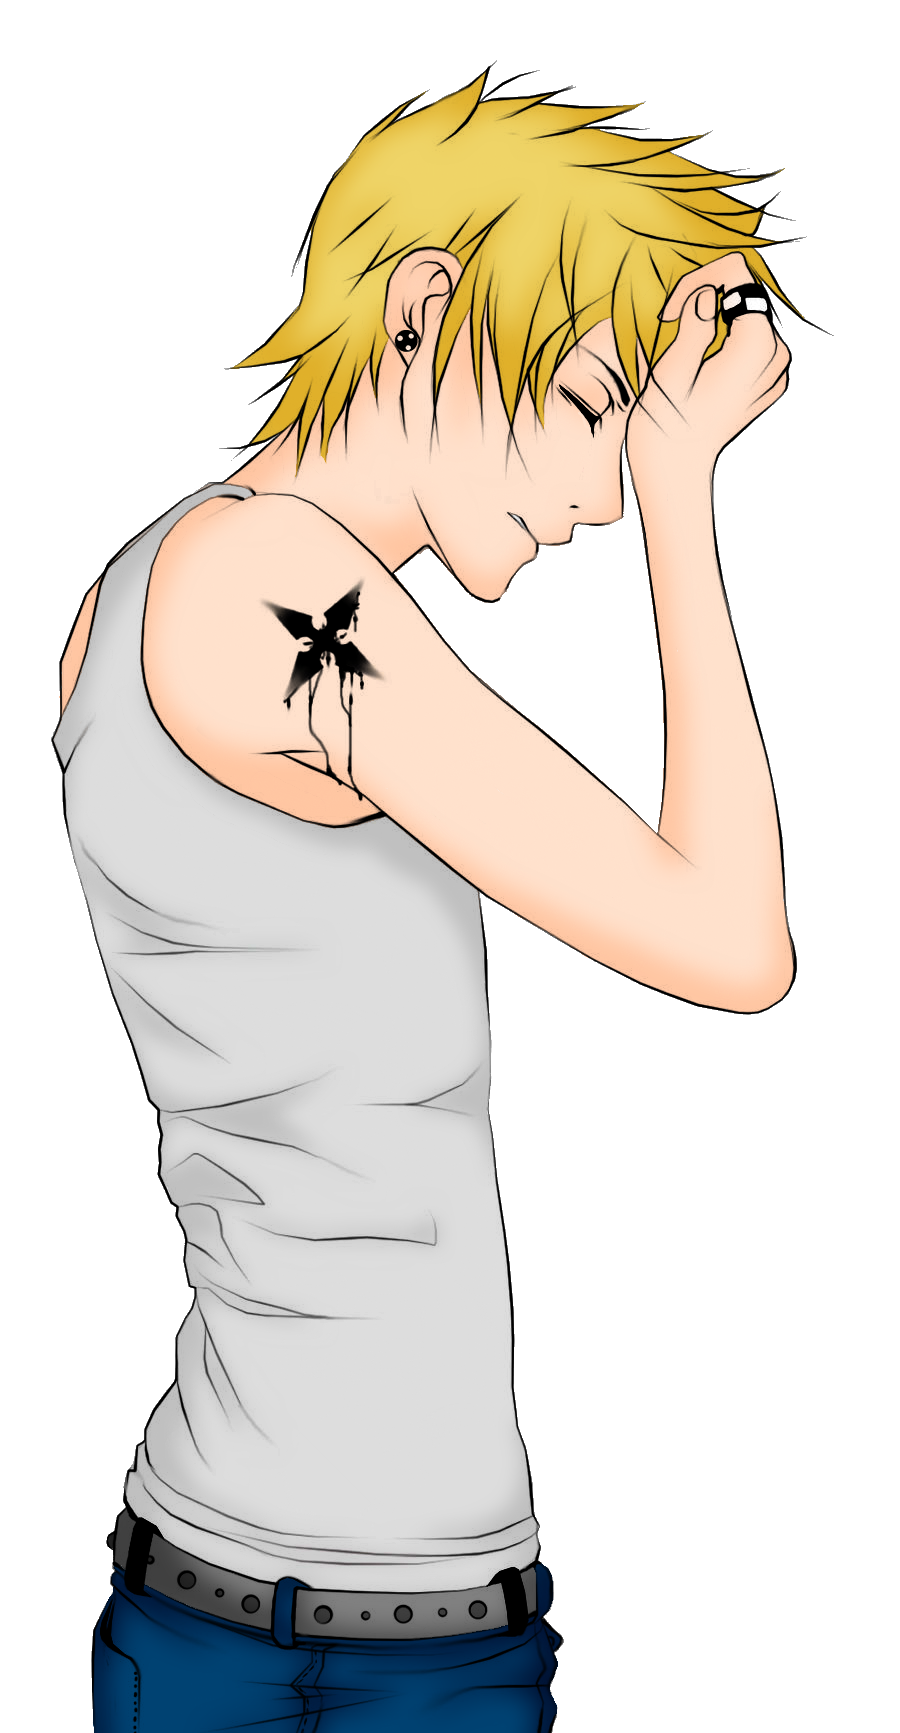 roxas__kingdom_hearts_by_featherletters-d5l0nyy.png